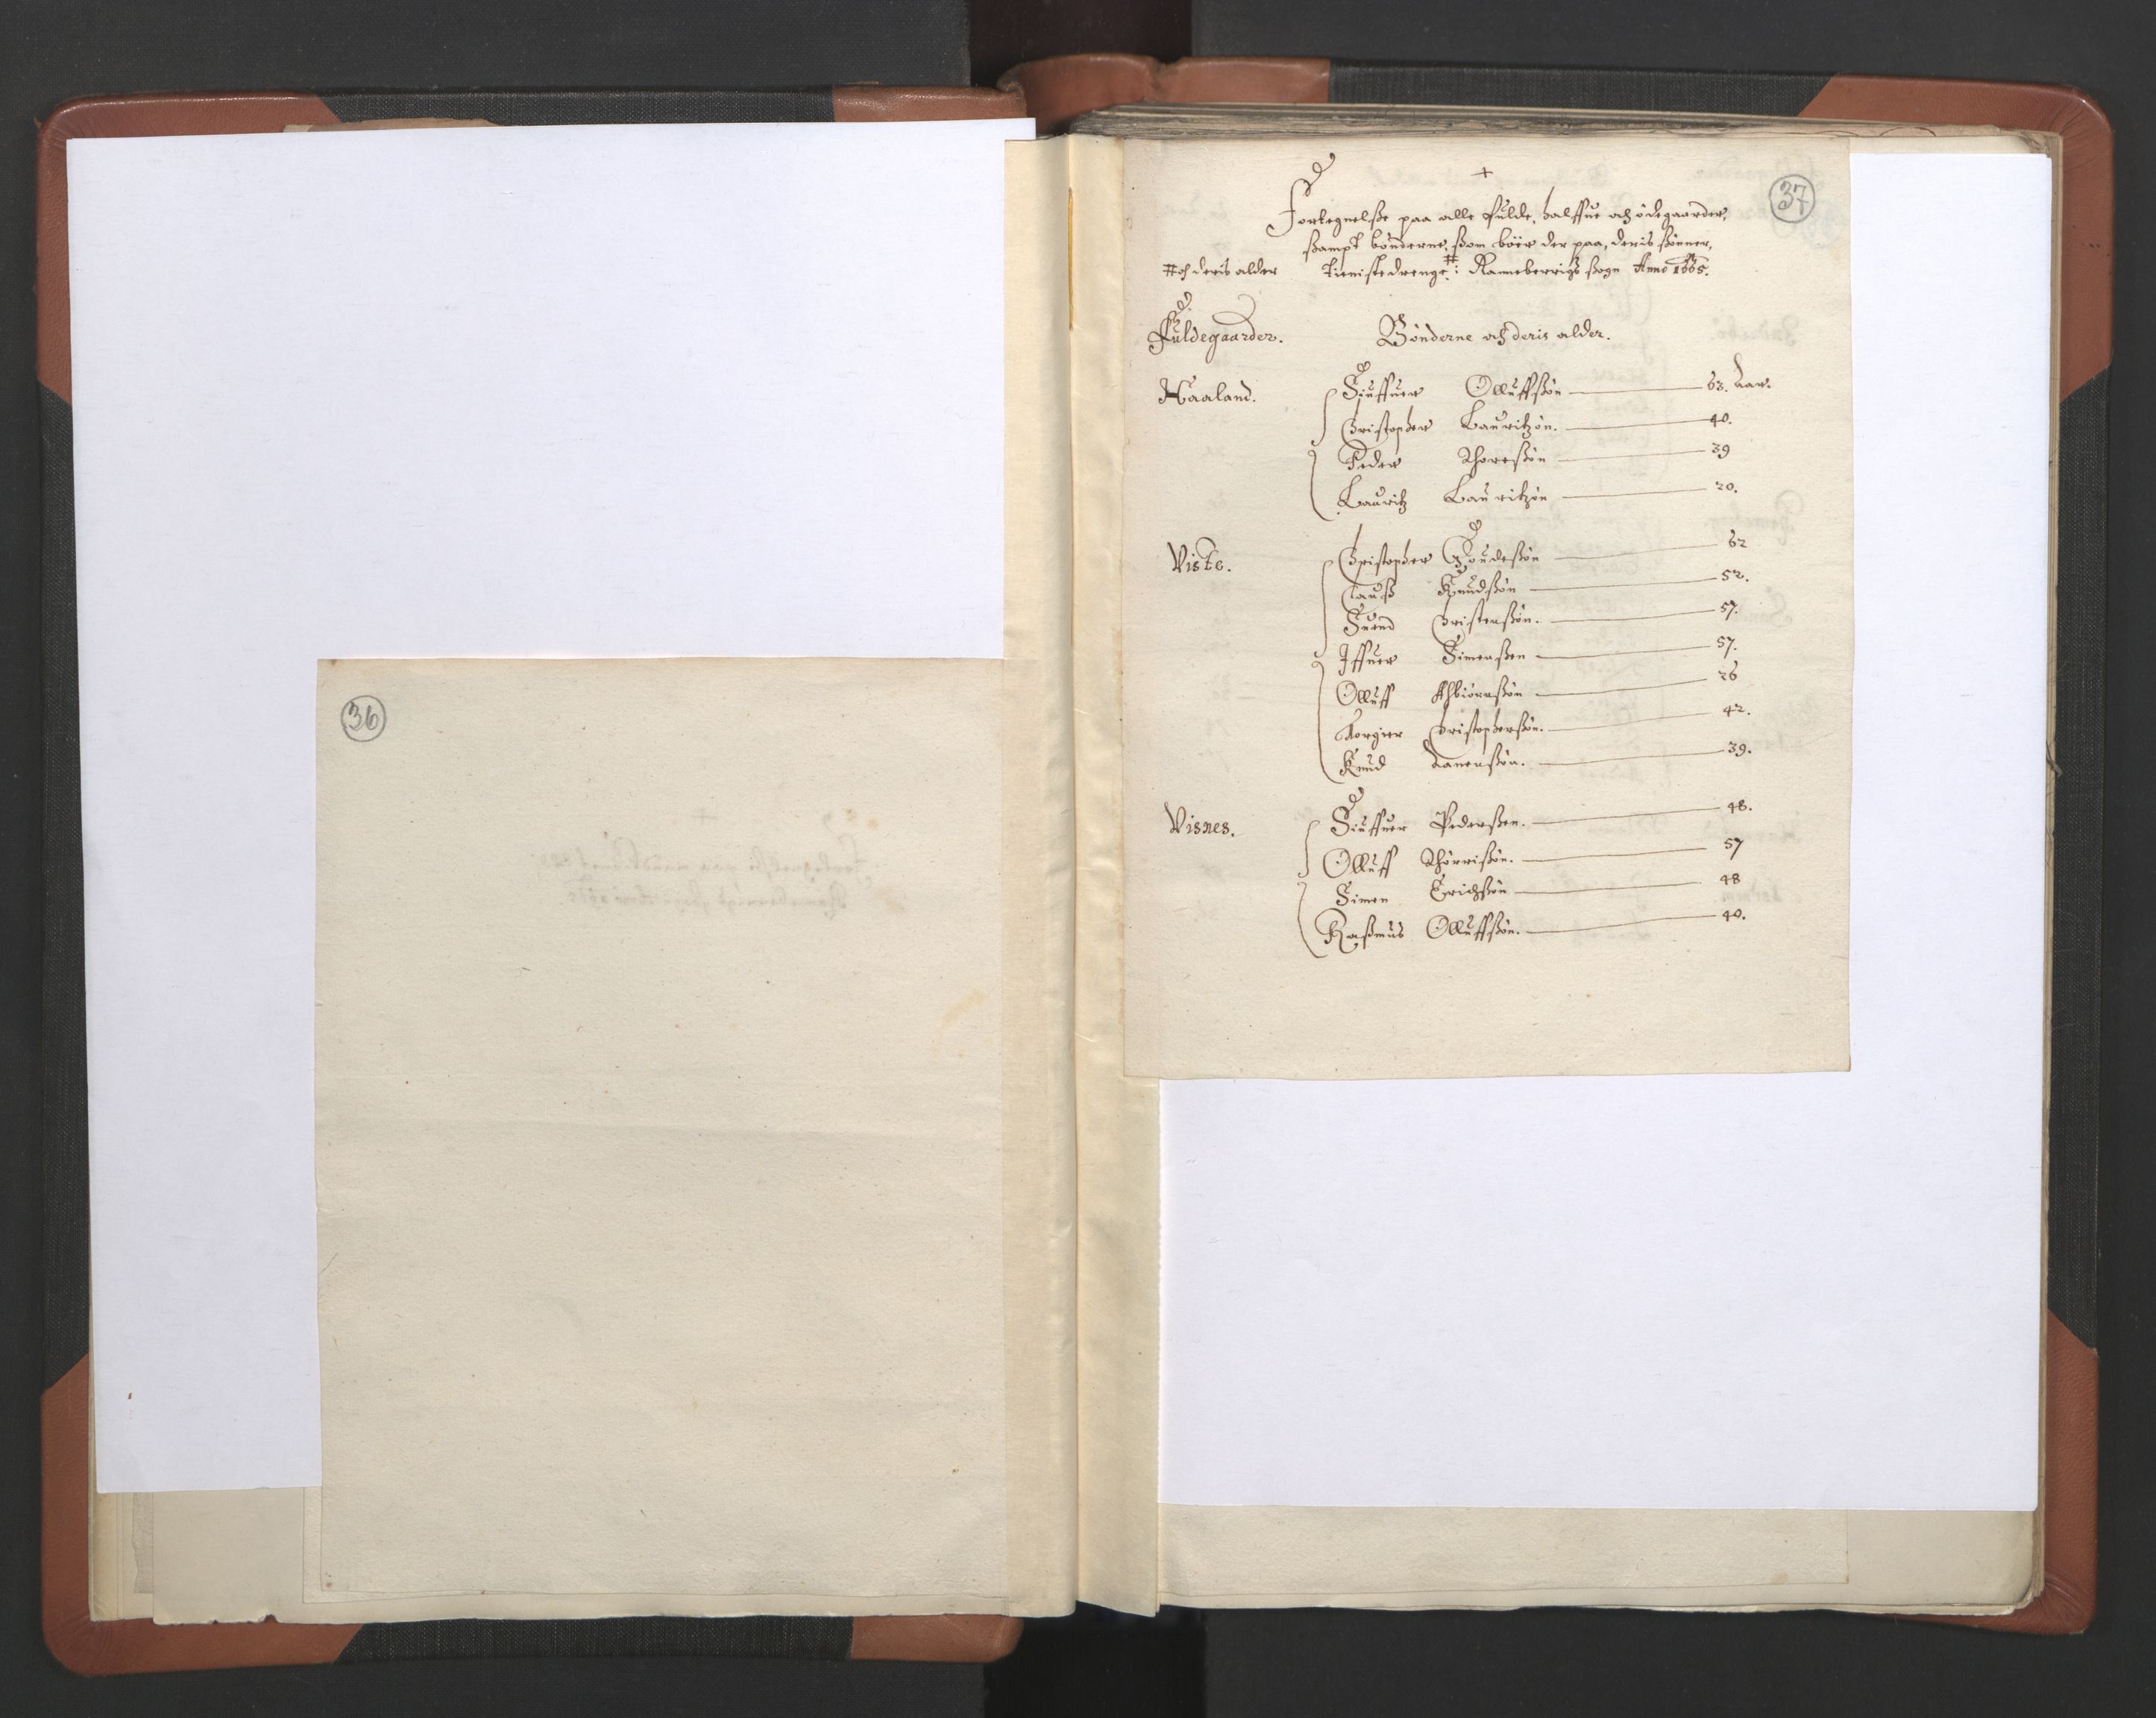 RA, Vicar's Census 1664-1666, no. 18: Stavanger deanery and Karmsund deanery, 1664-1666, p. 36-37